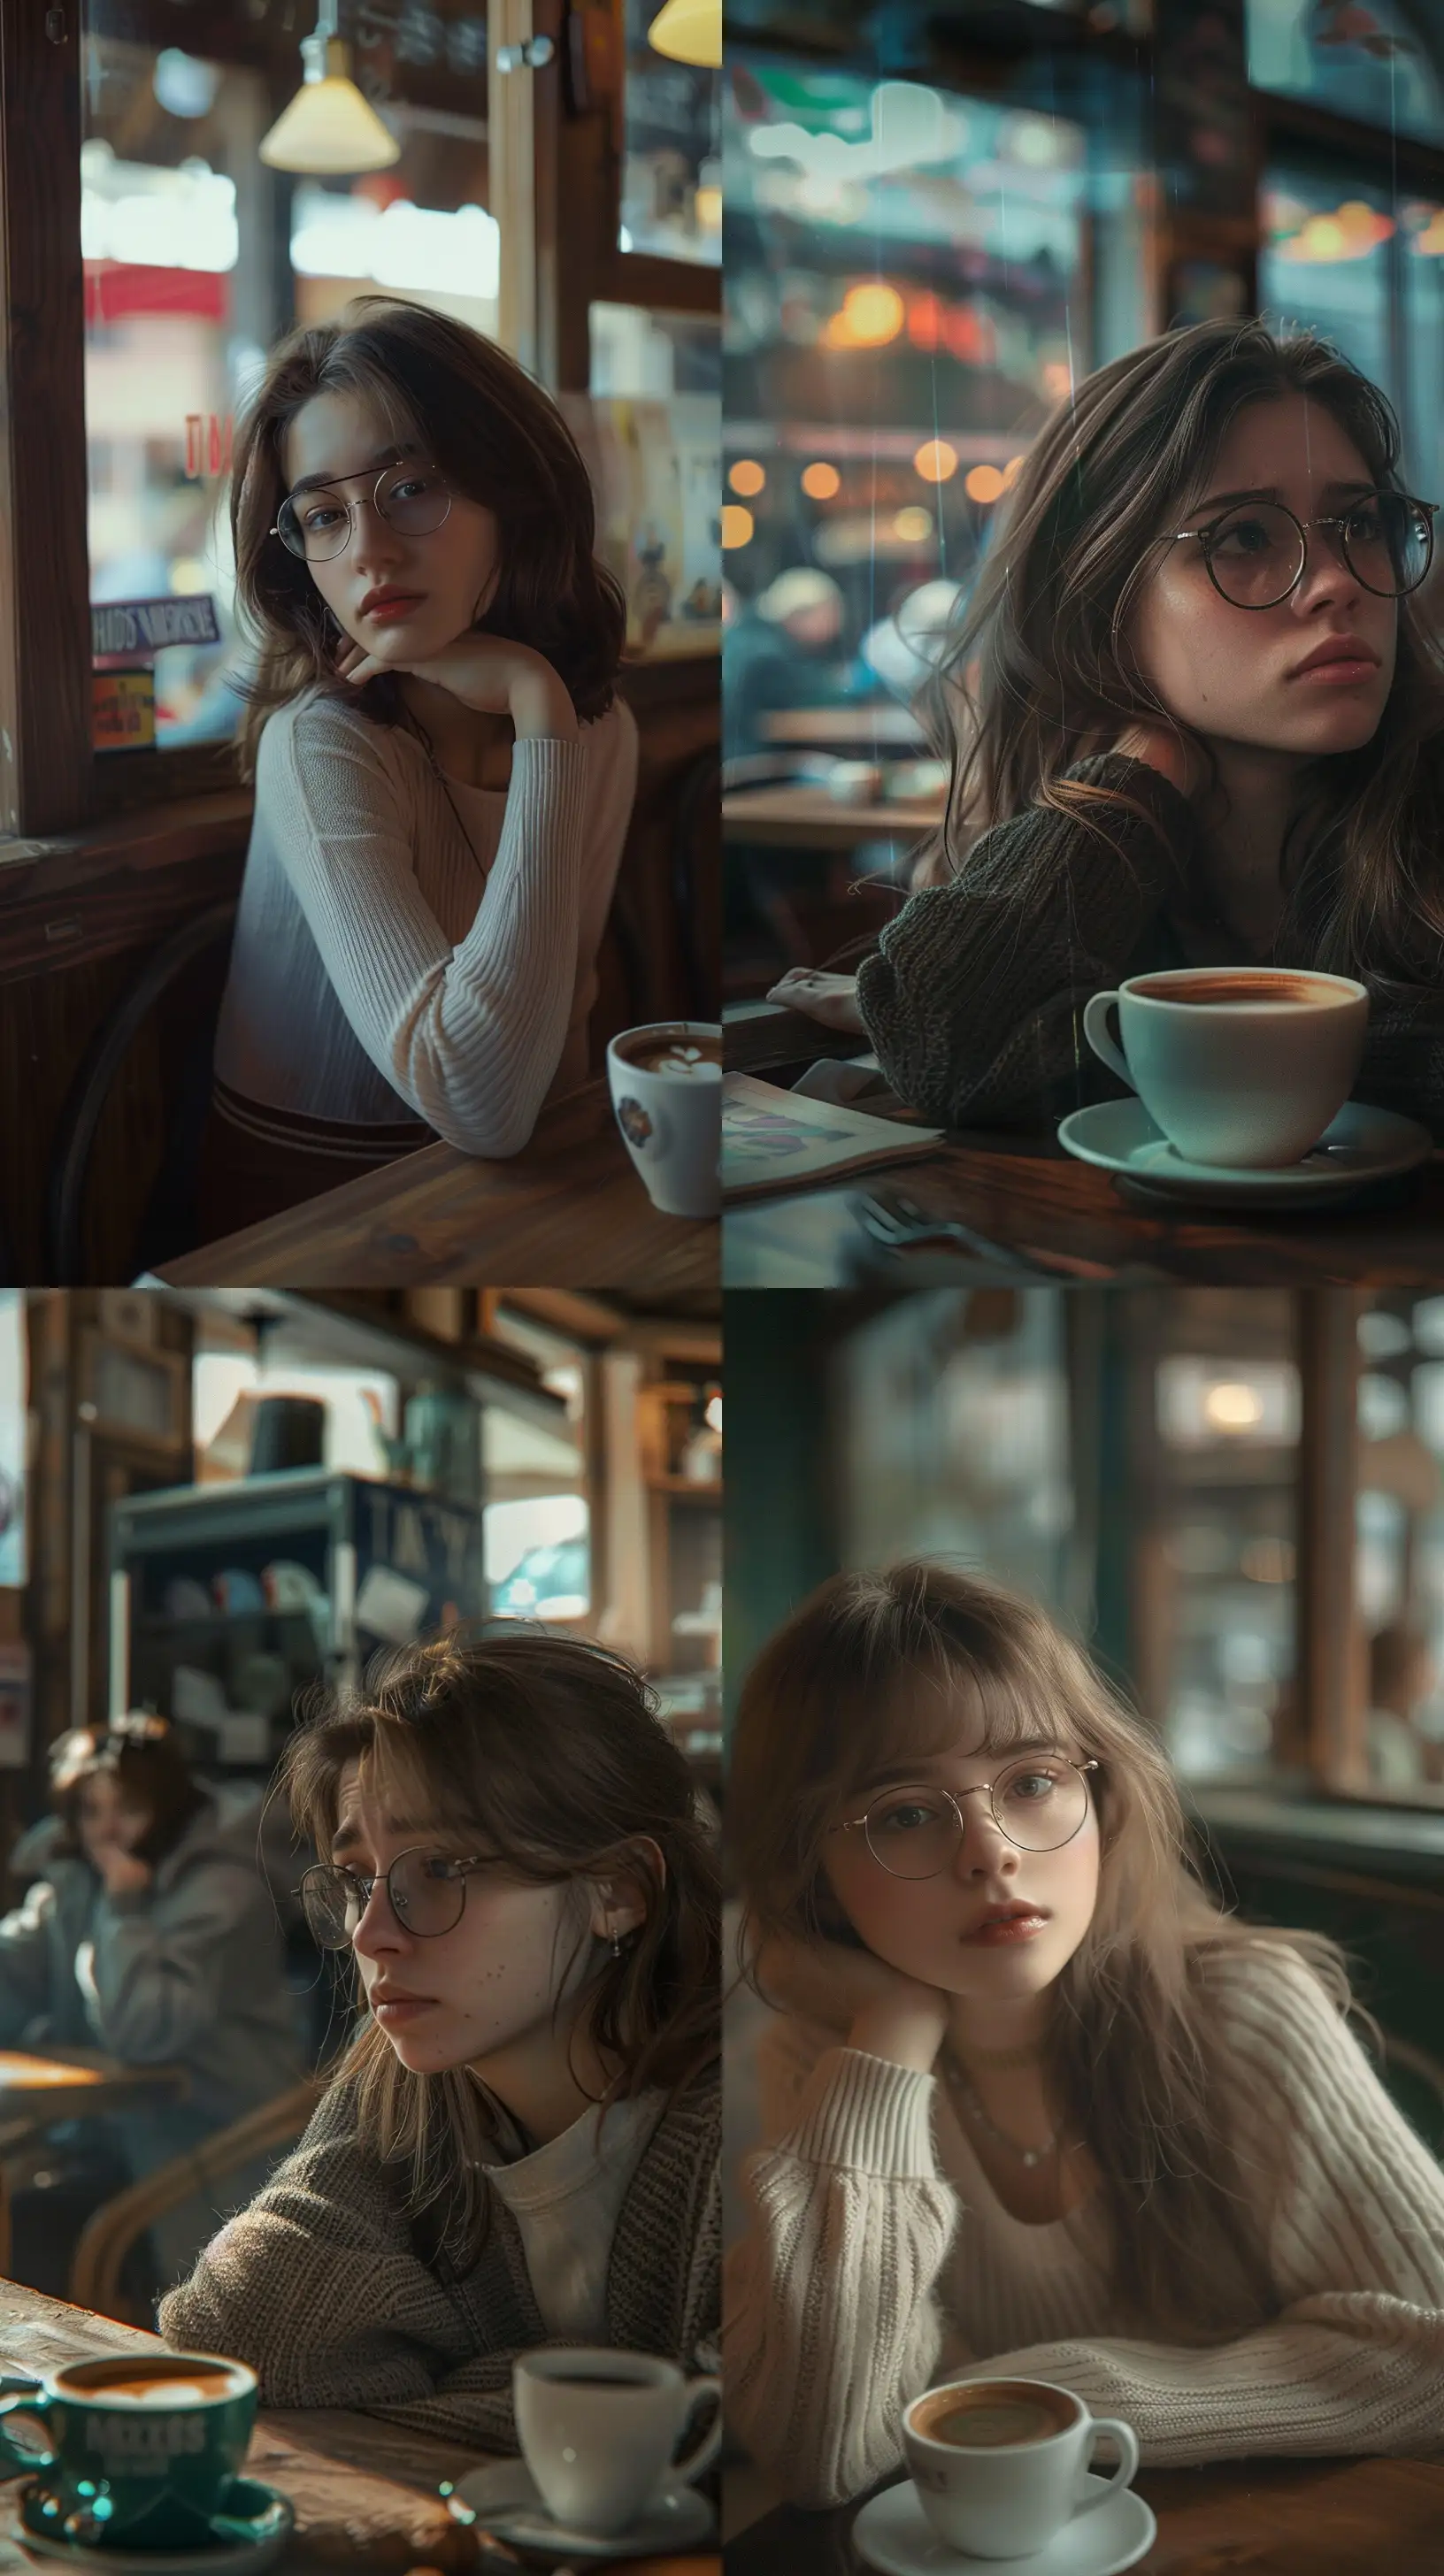 Sad-Girl-in-Old-Country-Cafe-with-Coffee